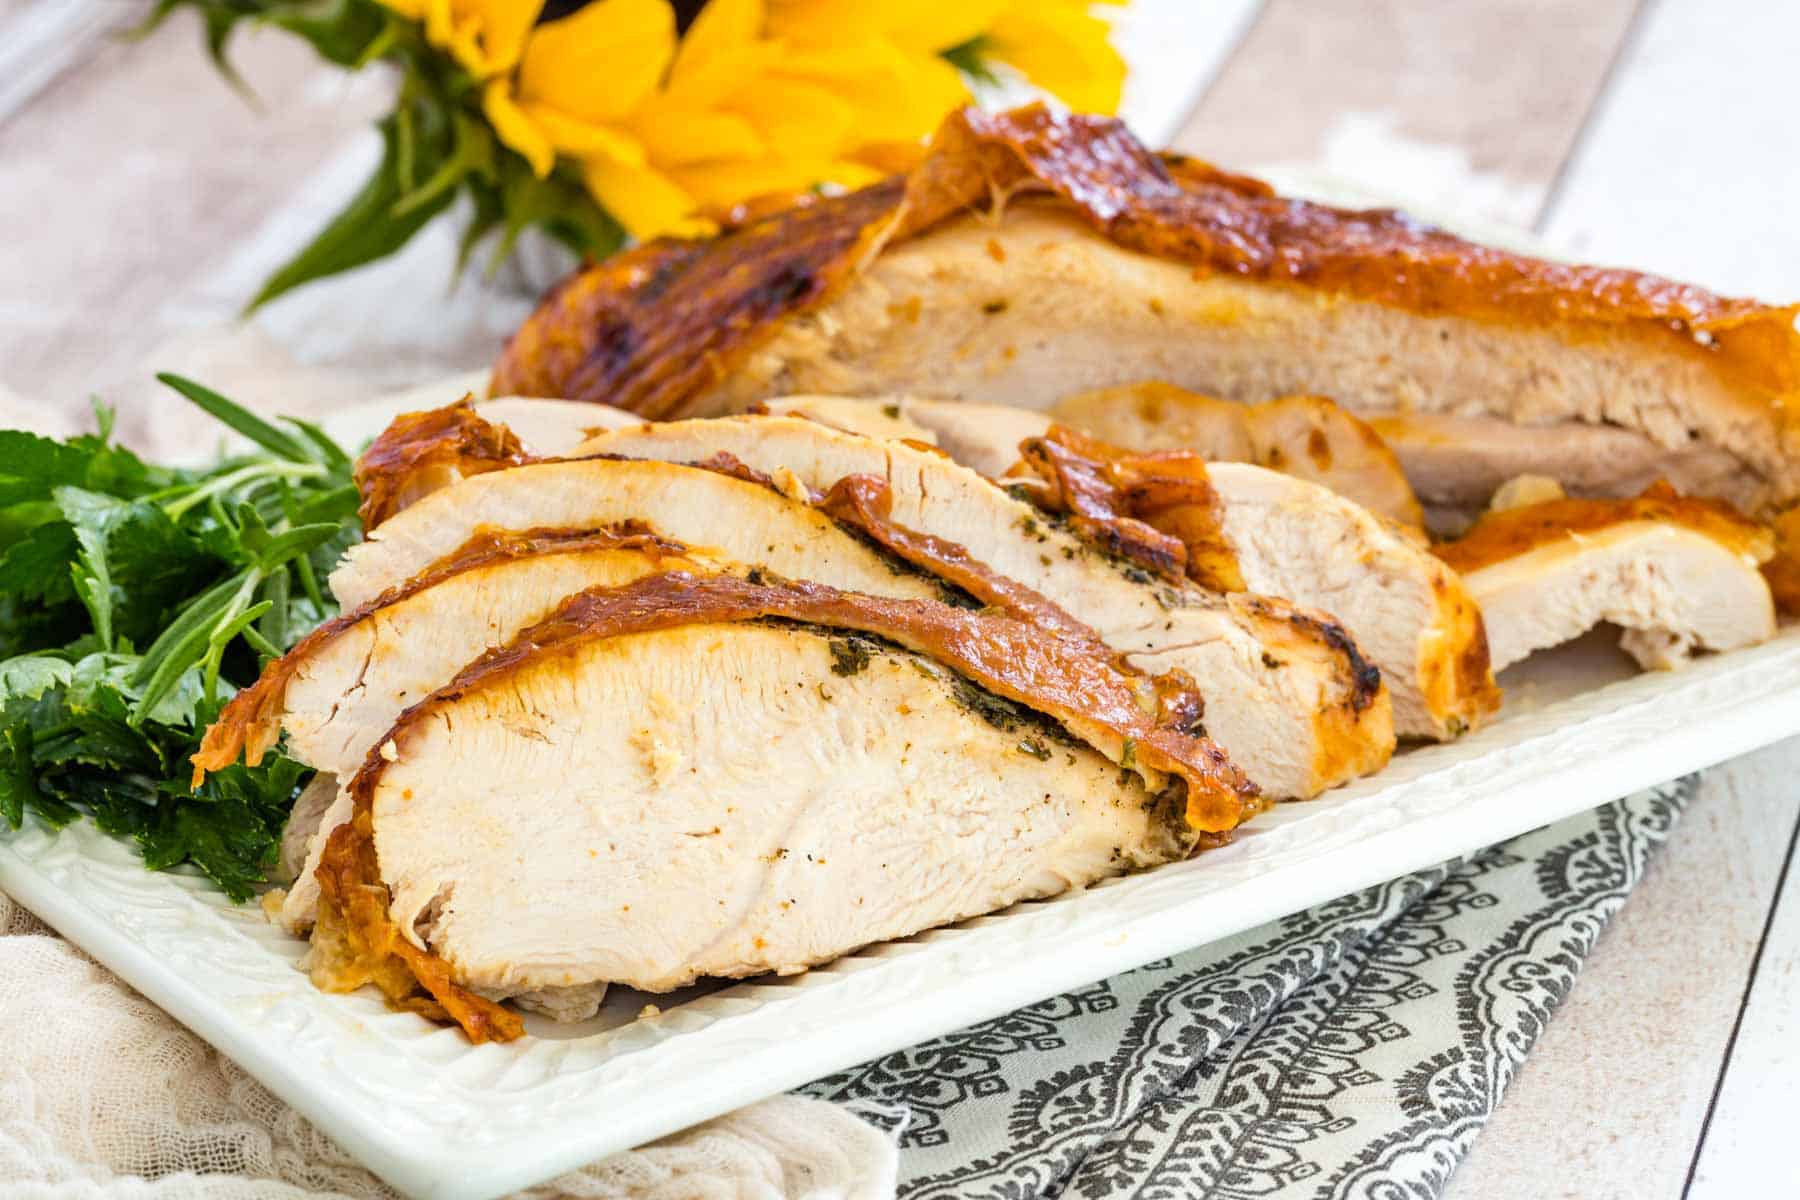 A carved air fryer turkey breast on a platter.